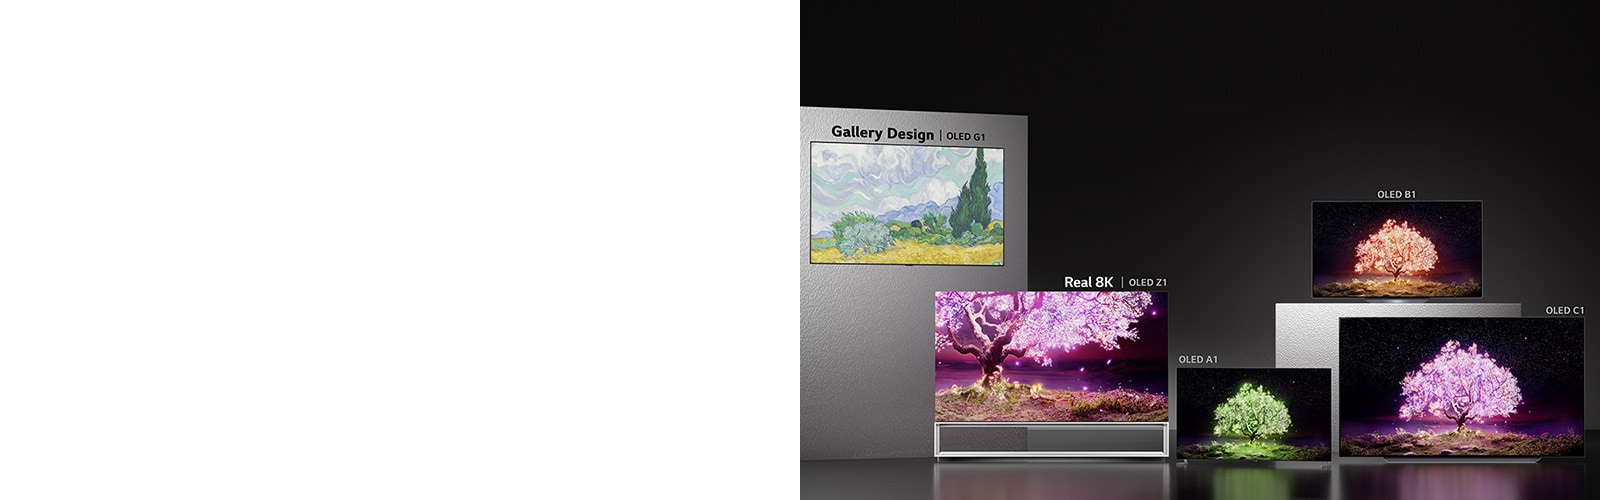 The Gallery Design OLED G1, Real 8K OLED Z1, OLED A1, OLED B1, and OLED C1 TVs arranged in front of a dark backdrop.